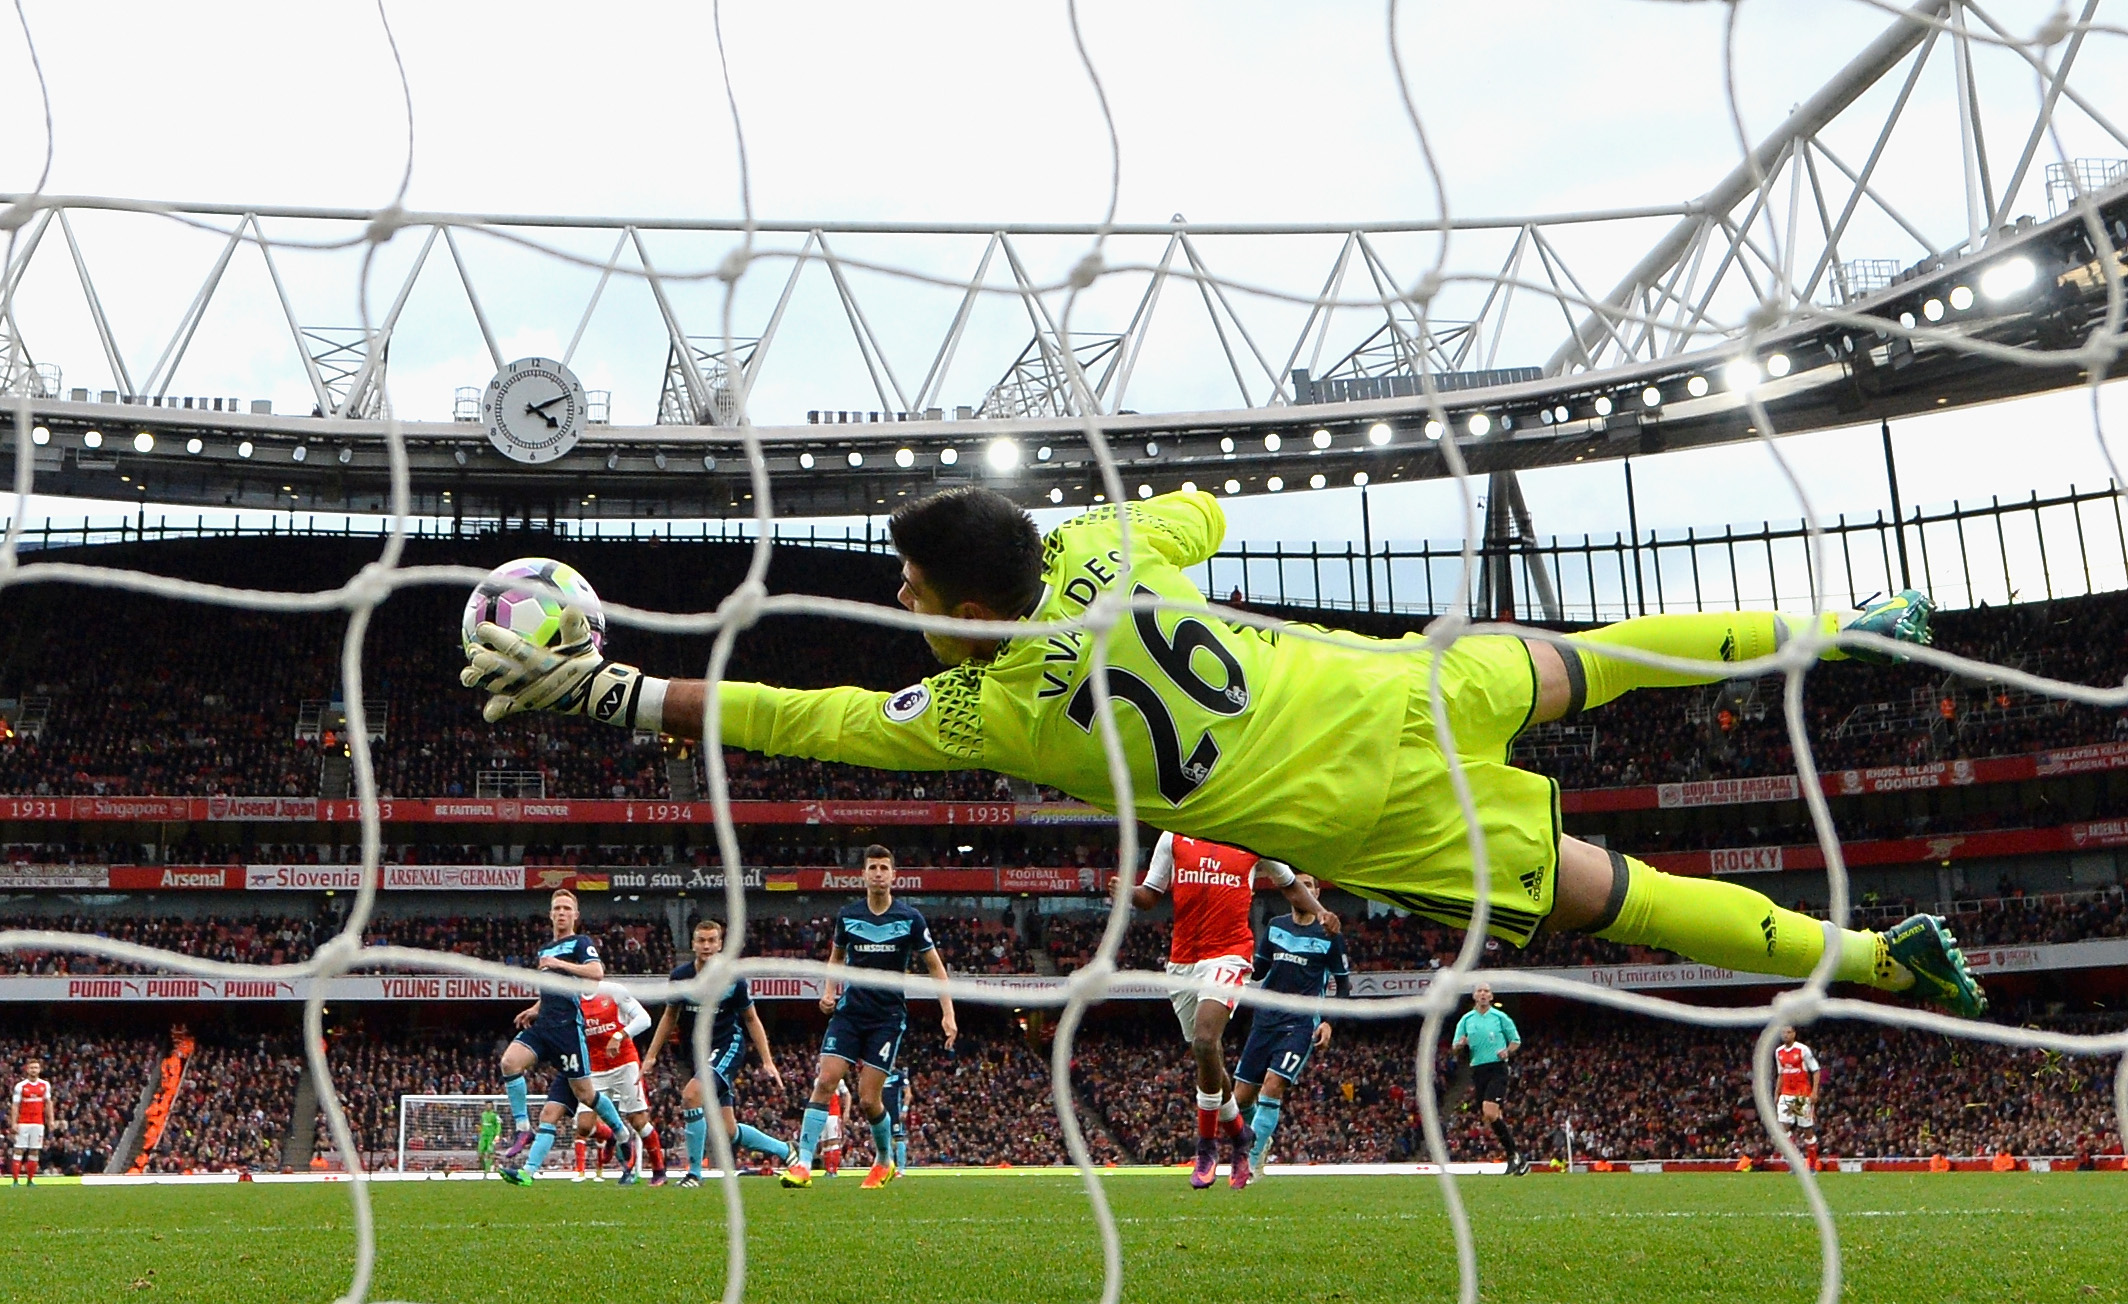 LONDON, ENGLAND - OCTOBER 22:  Victor Valdes of Middlesbrough makes a save during the Premier League match between Arsenal and Middlesbrough at Emirates Stadium on October 22, 2016 in London, England.  (Photo by Dan Mullan/Getty Images)